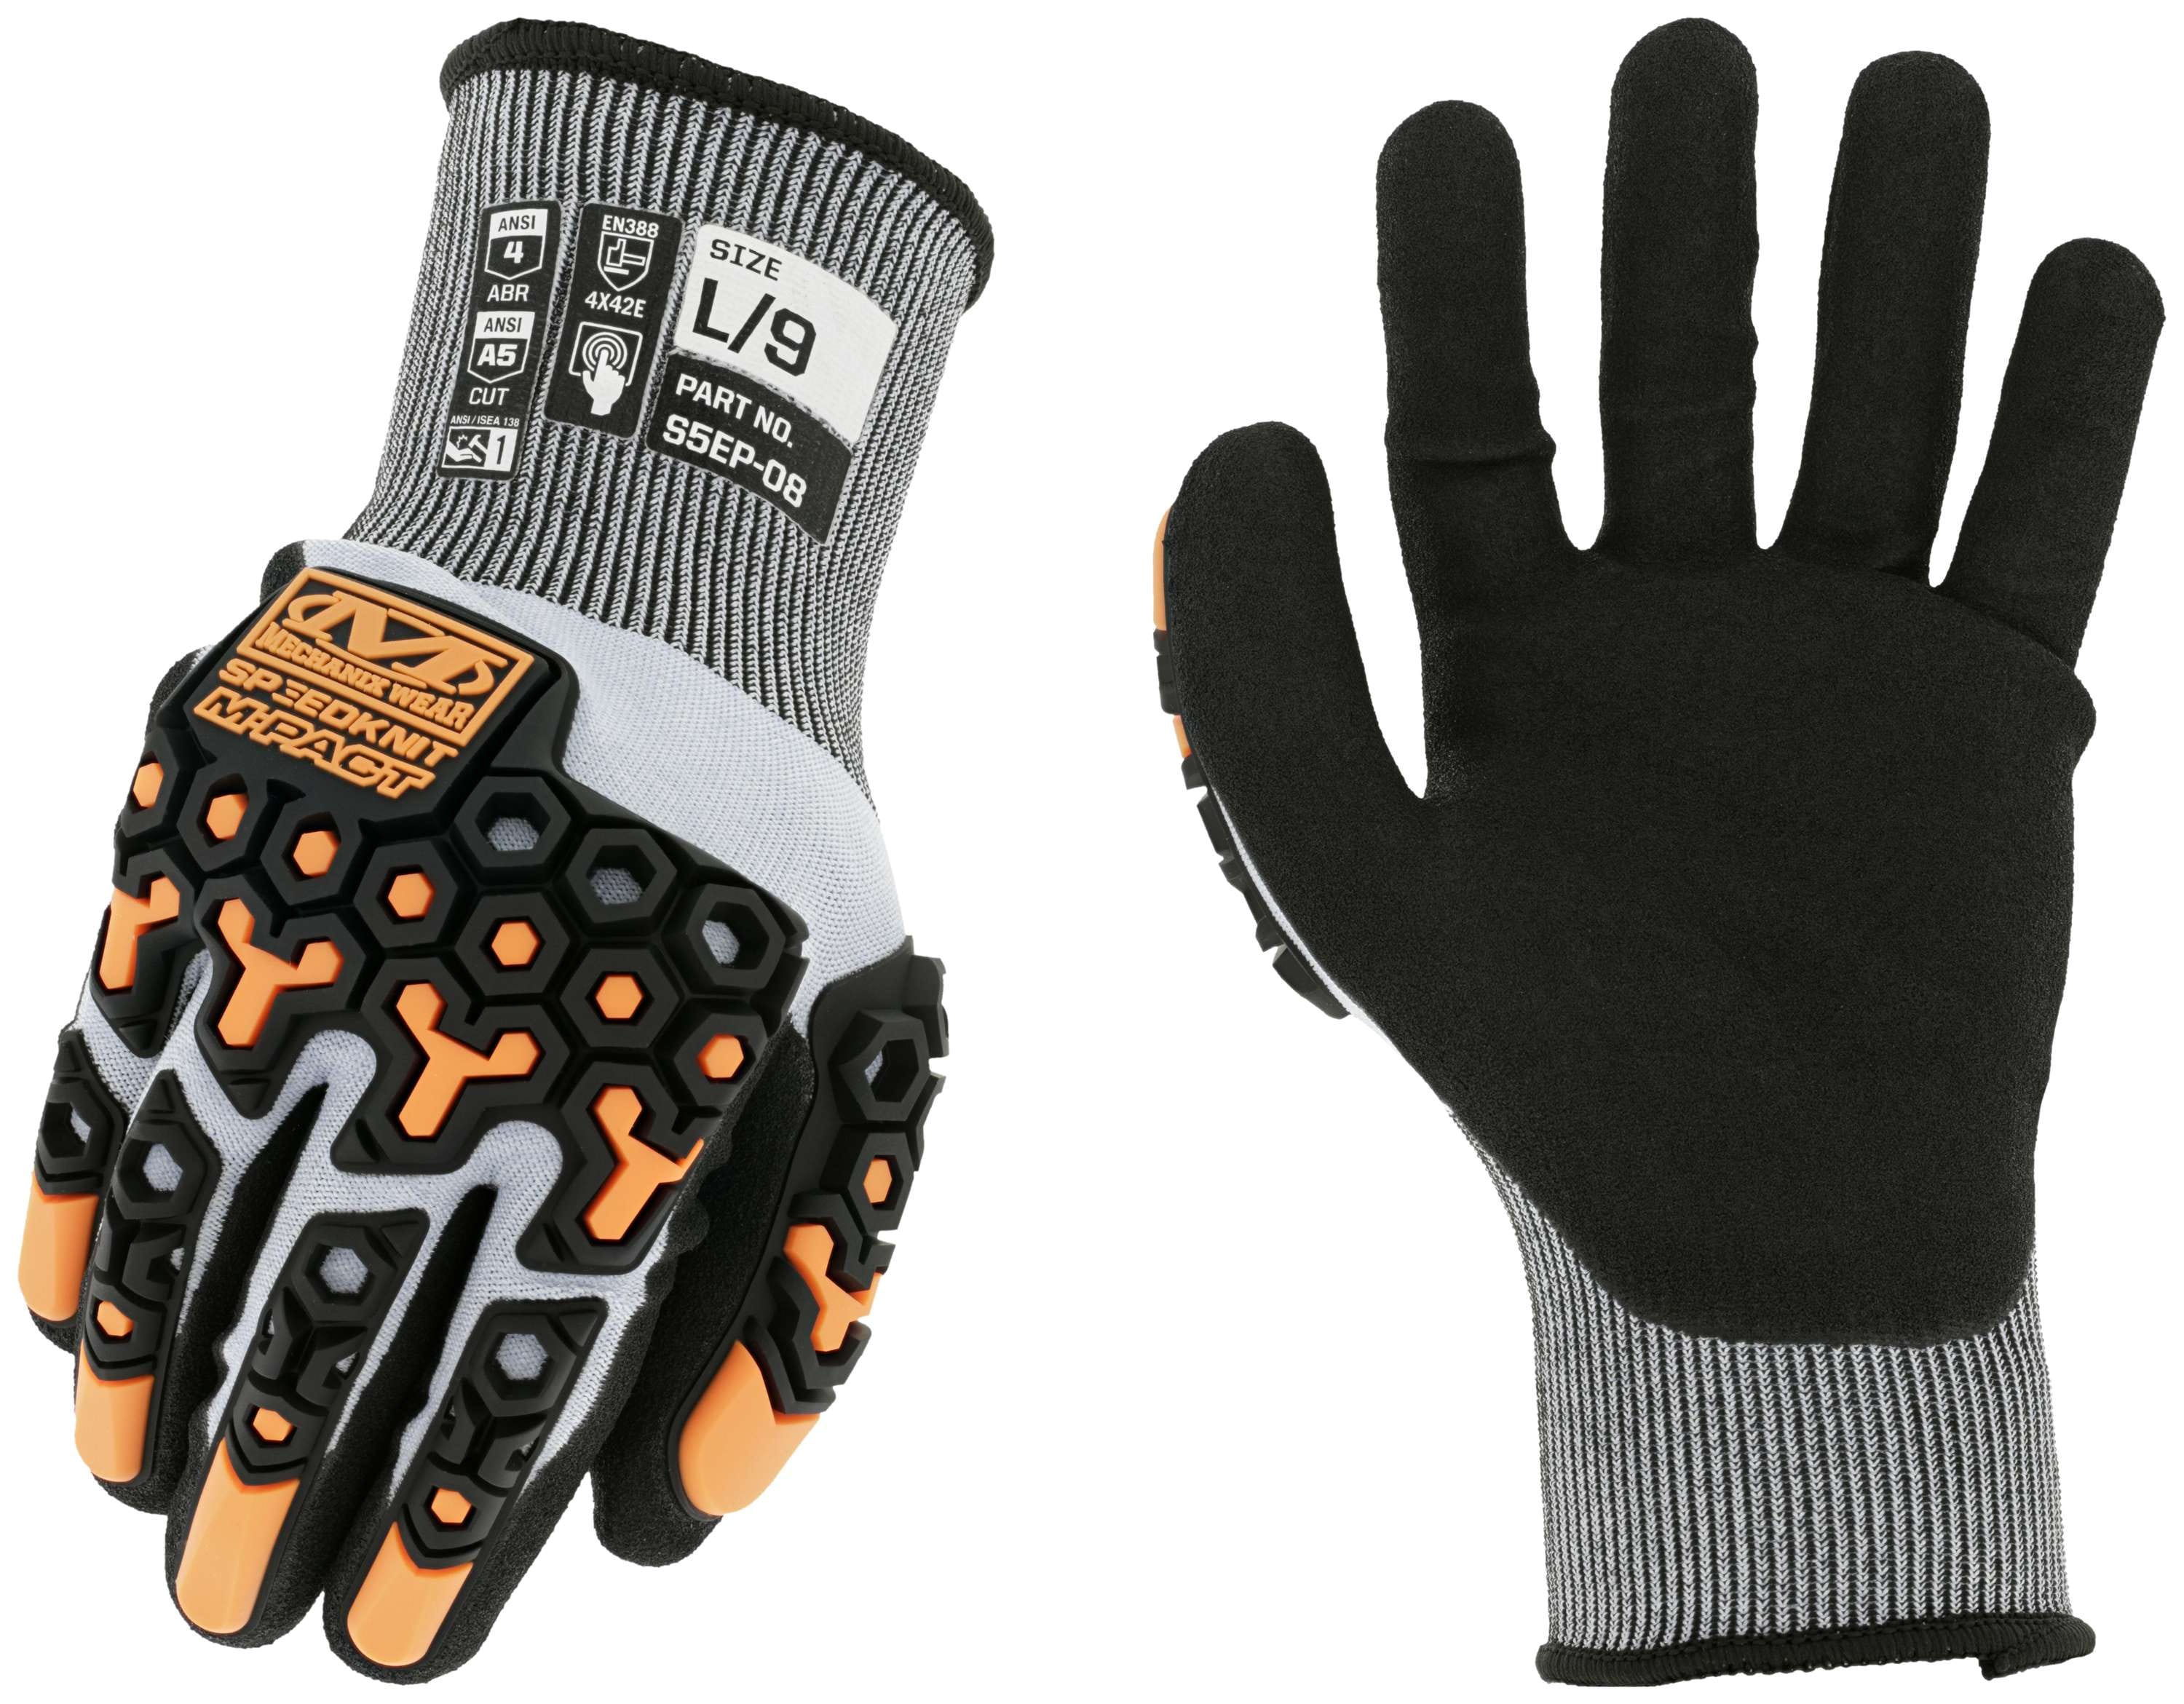 Mechanix Wear: The Original Work Glove with Secure Fit, Synthetic Leather  Performance Gloves for Multi-Purpose Use, Durable, Touchscreen Capable